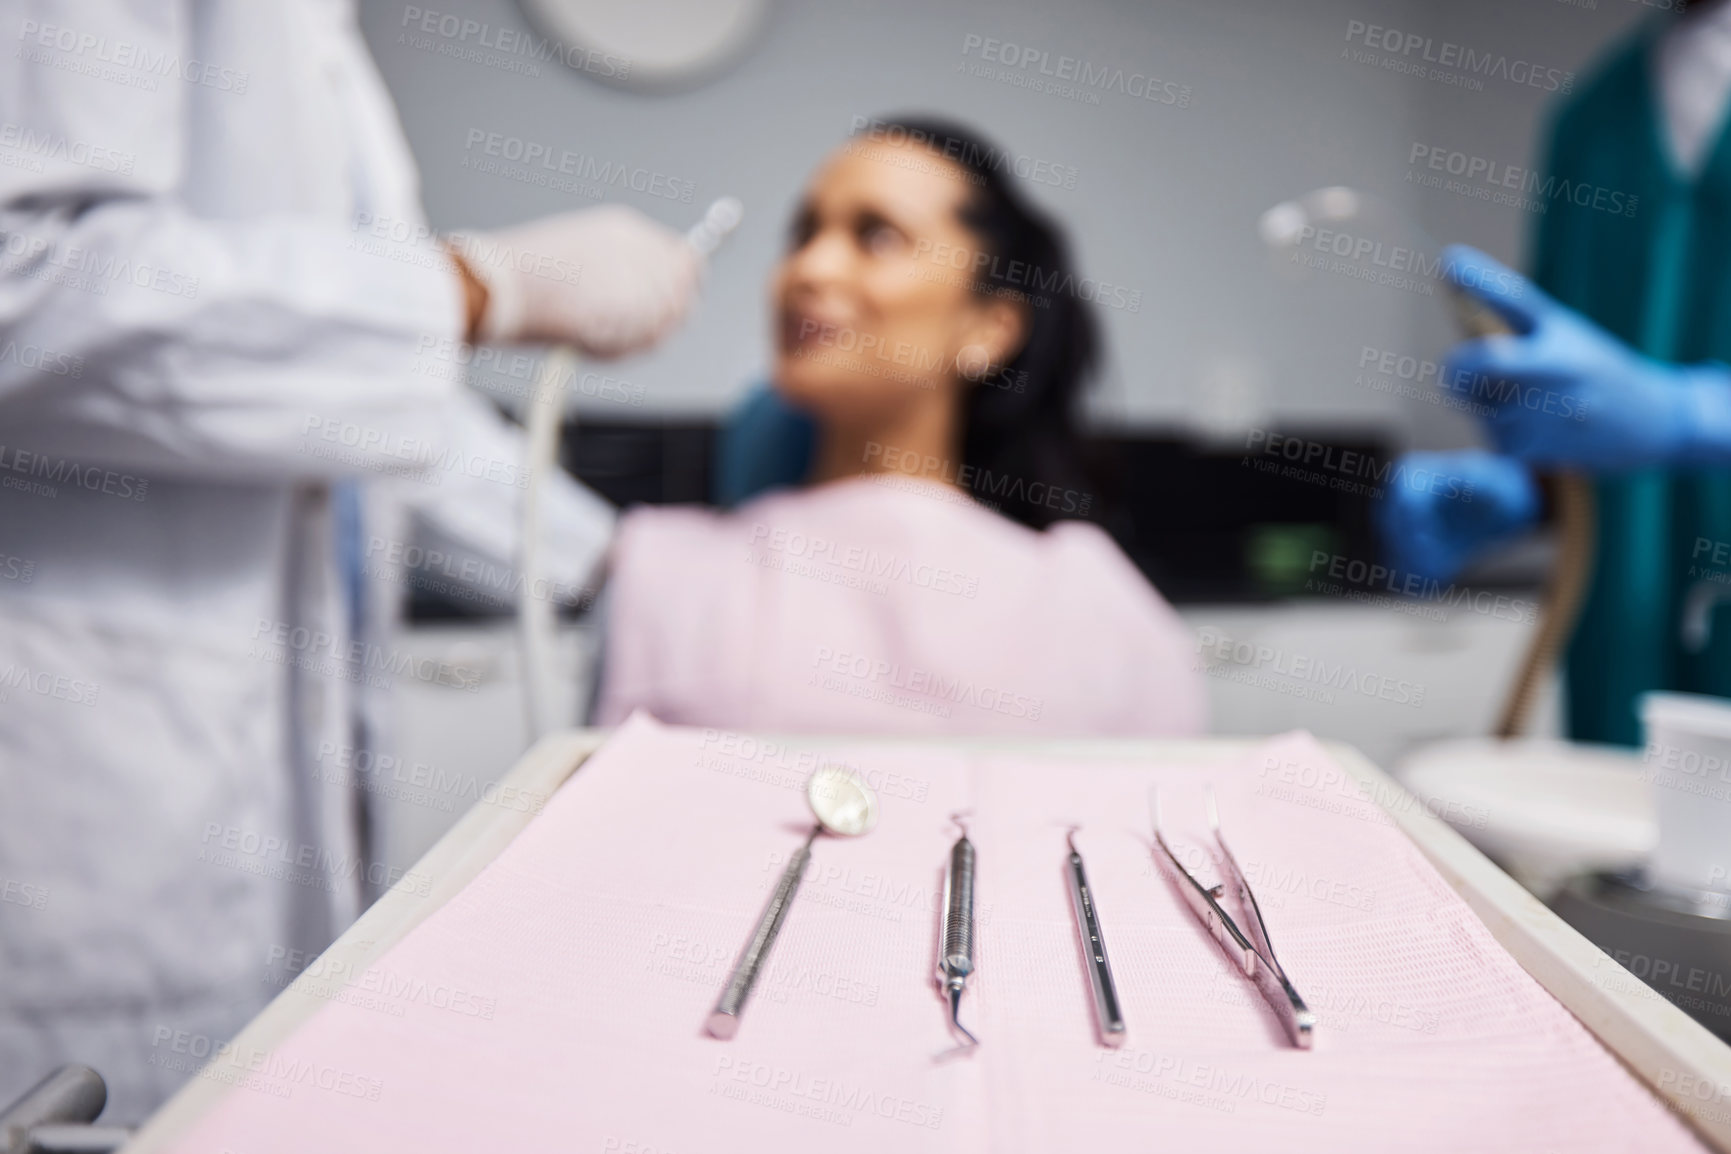 Buy stock photo Shot of a woman having dental work done on her teeth with various tools in the foreground